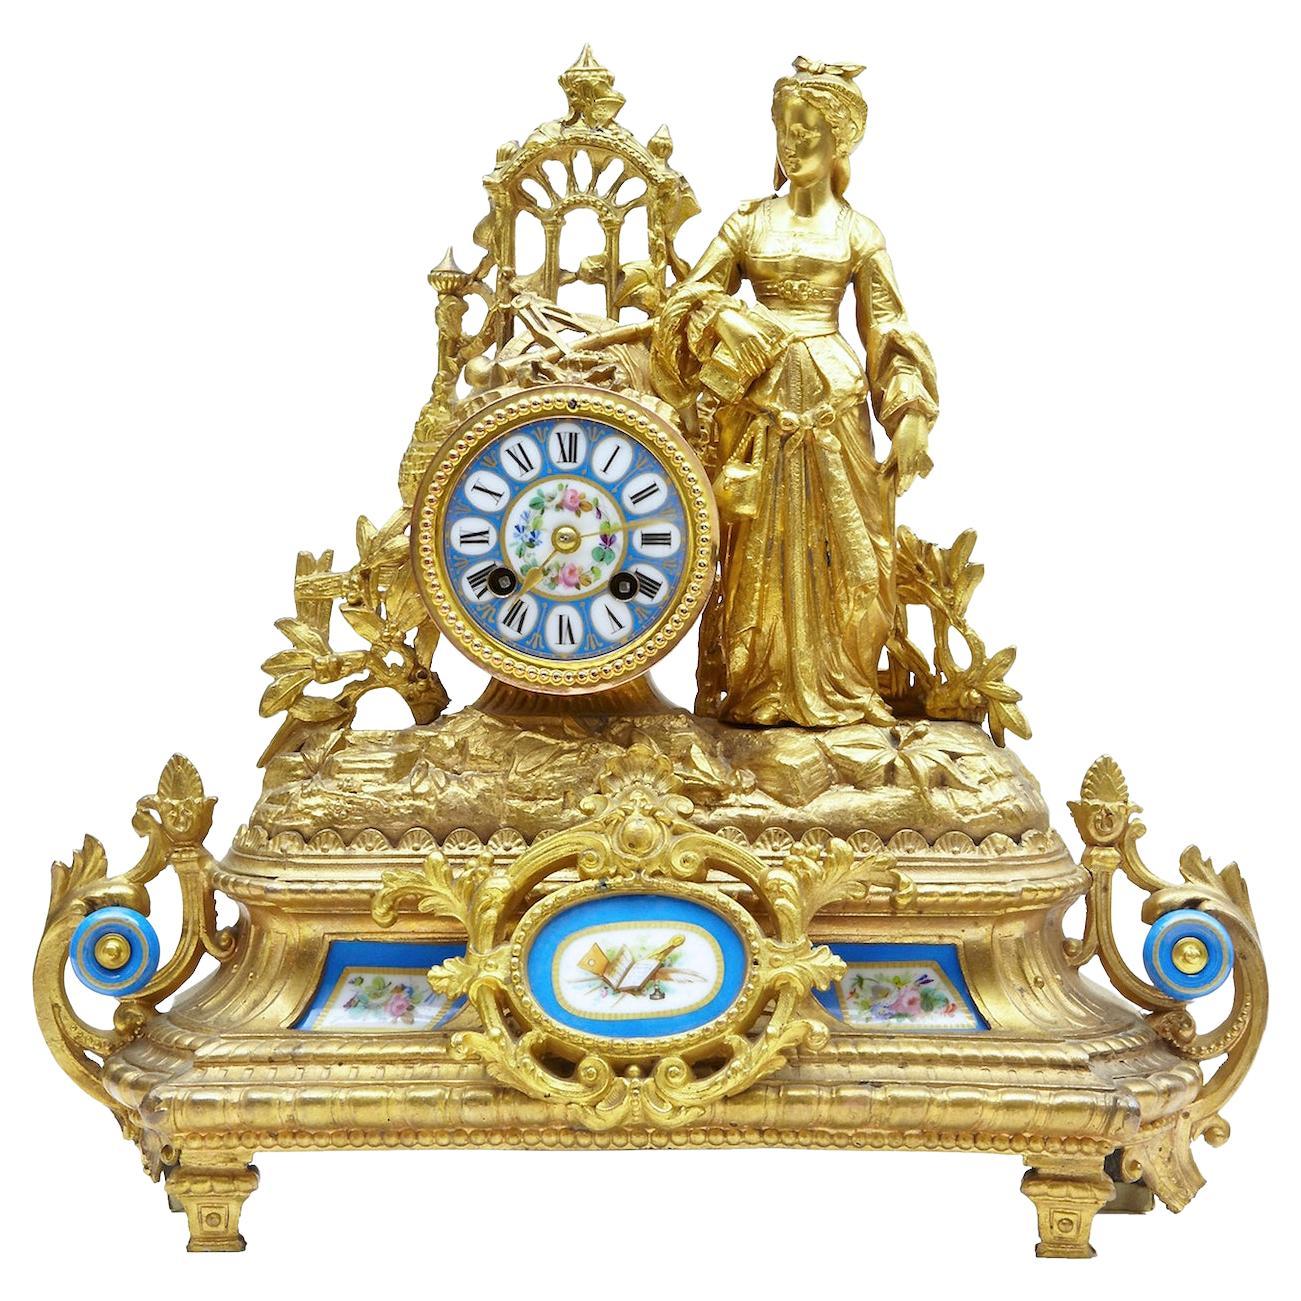 19th Century French Gilt Mantle Clock with Sevres Plaques